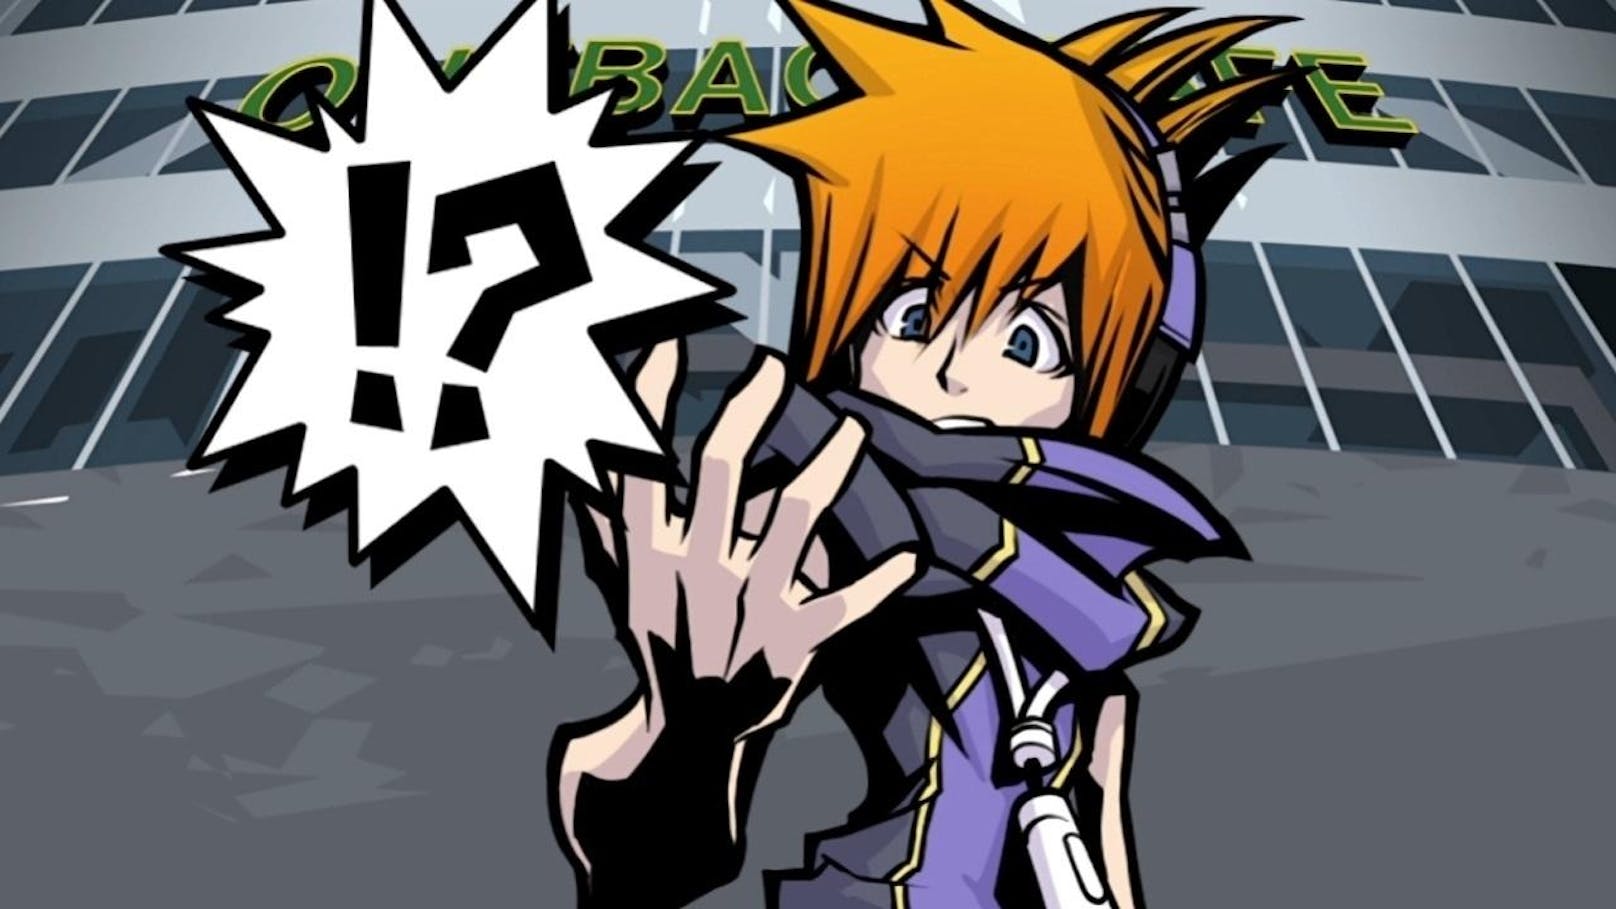  <a href="https://www.heute.at/digital/games/story/he-World-Ends-With-You-Final-Remix-Test-Review-53876571" target="_blank">The World Ends With You -Final Remix-</a>